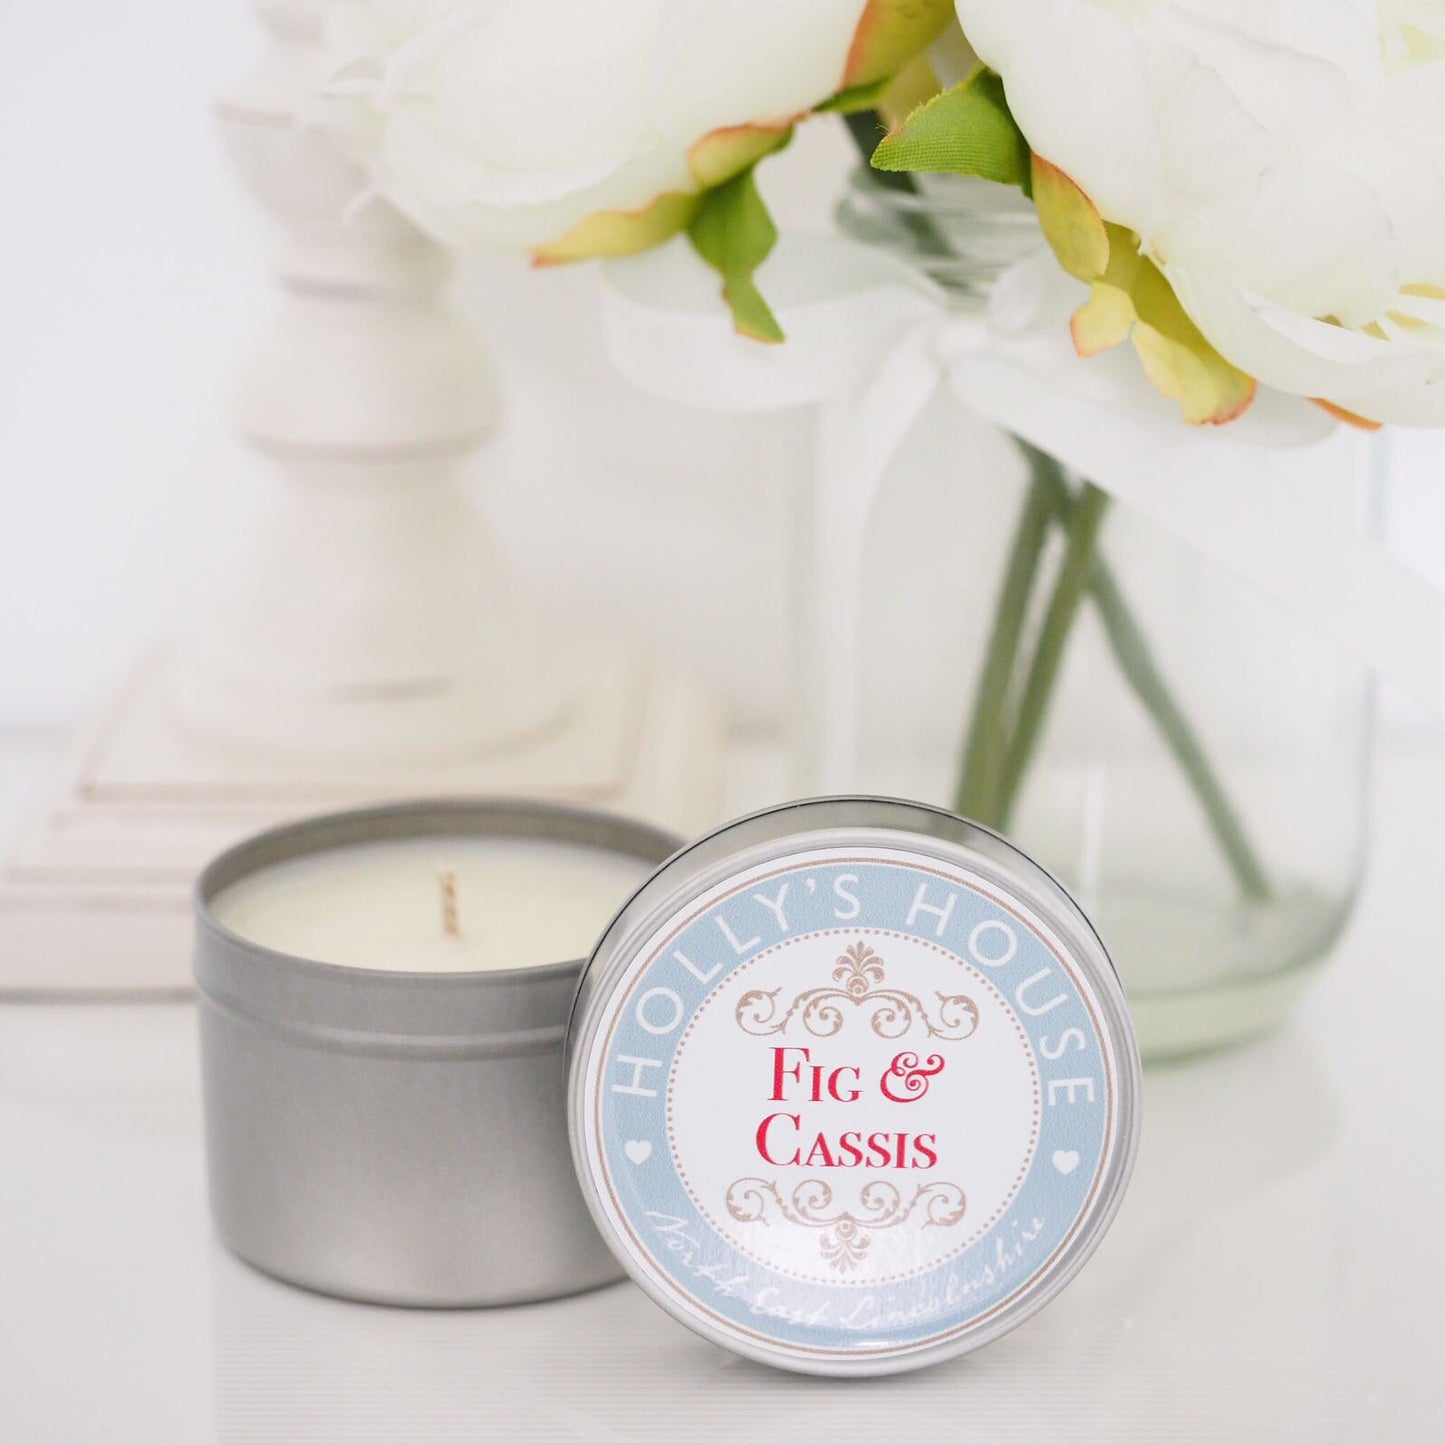 Fig & Cassis 100ml Candle Tin